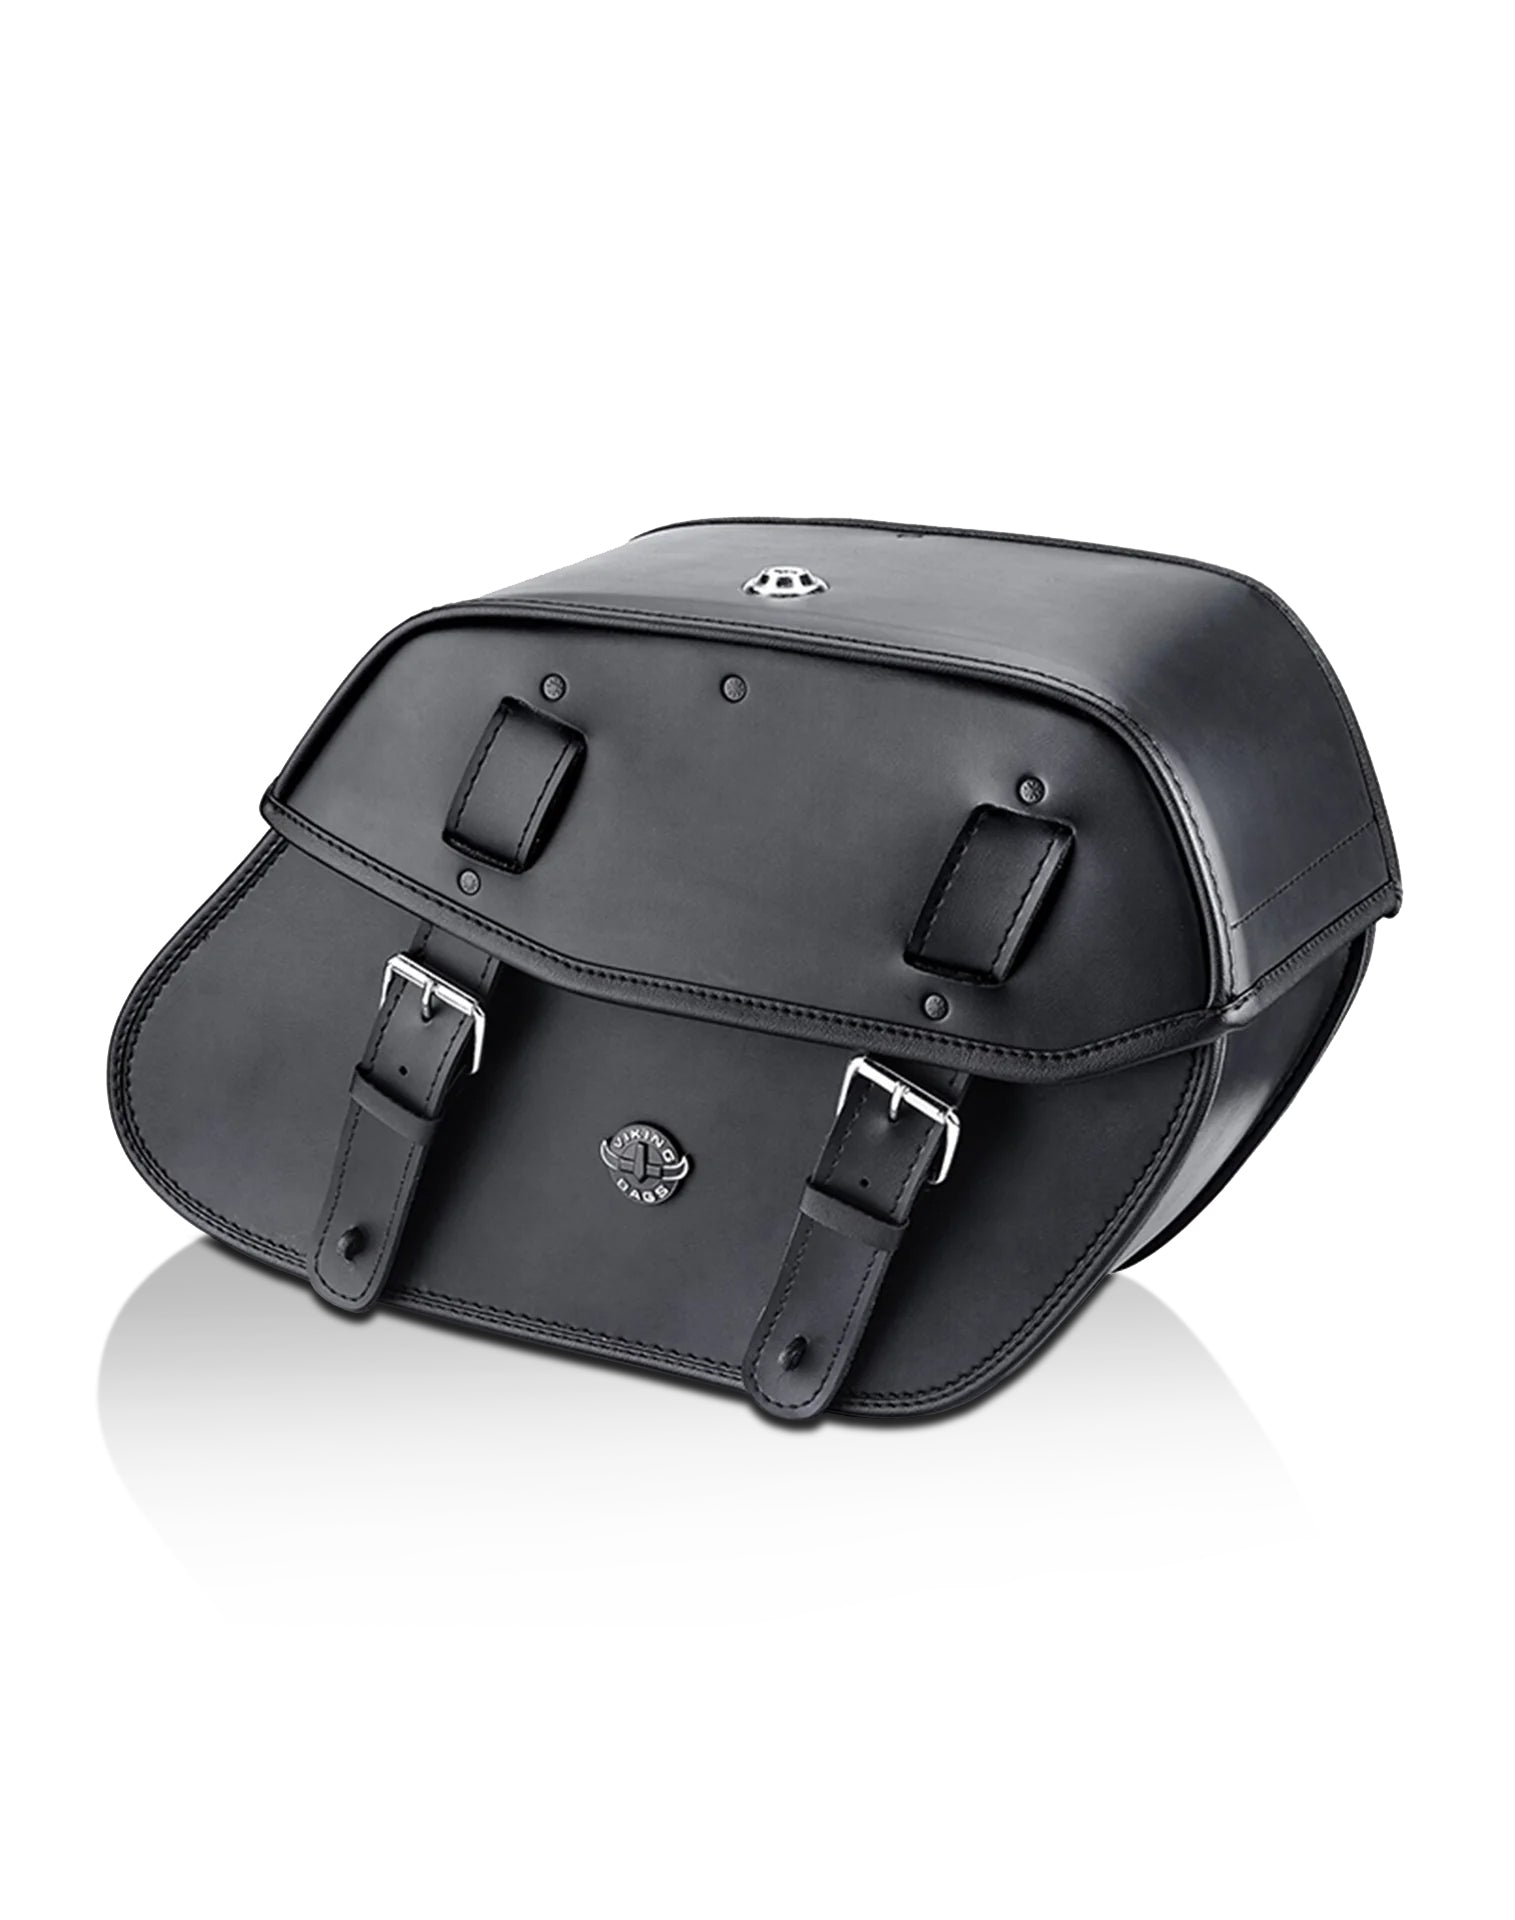 Viking Odin Large Leather Motorcycle Saddlebags For Harley Softail Deluxe Flstn I Main View